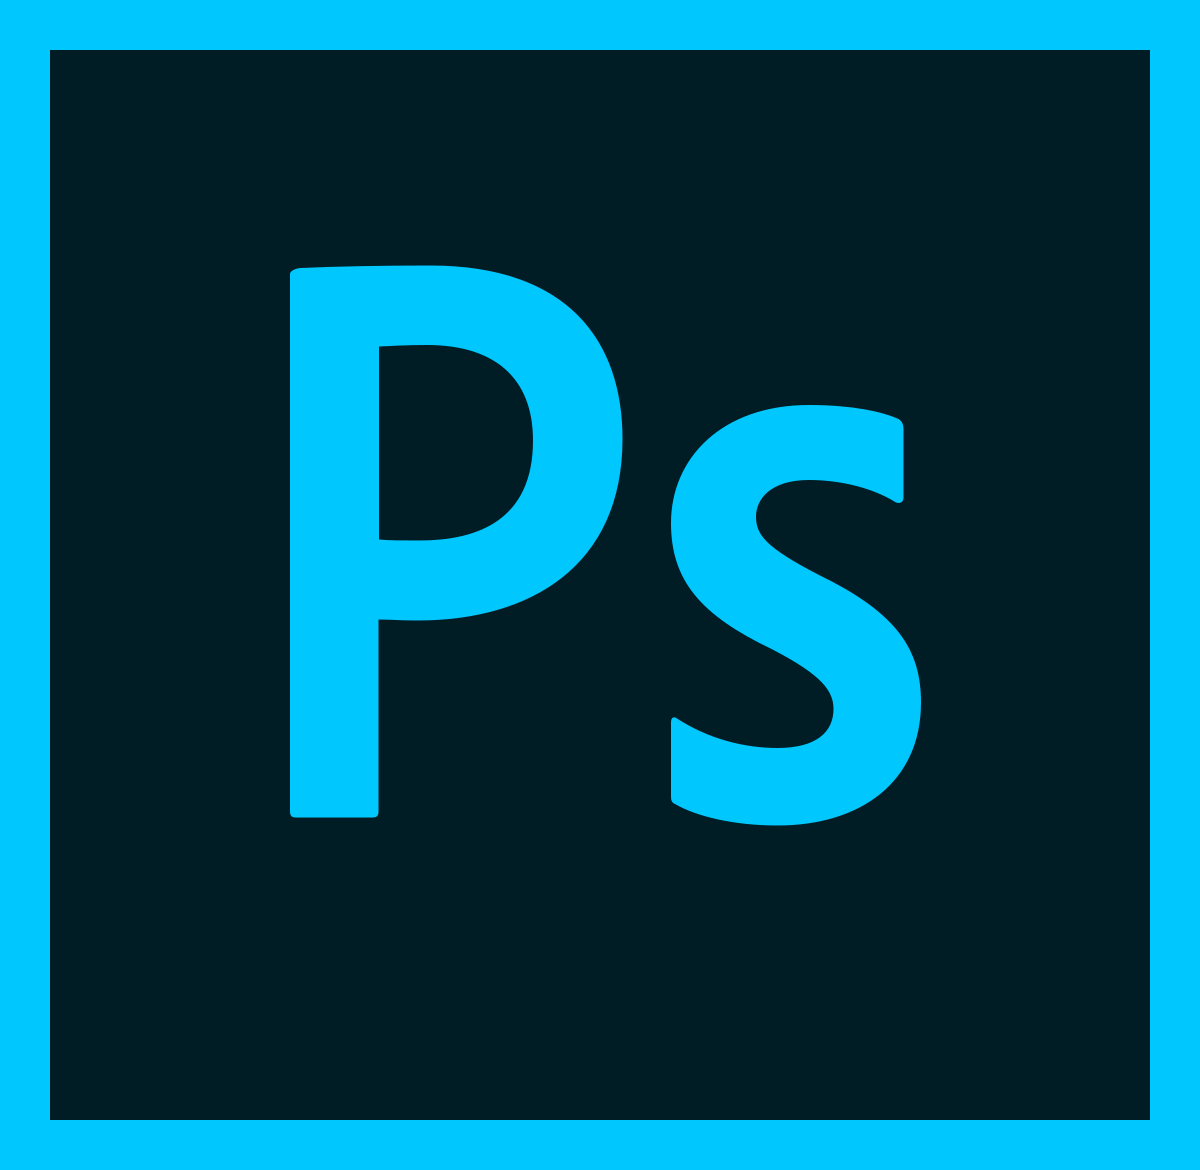 all adobe photoshop software